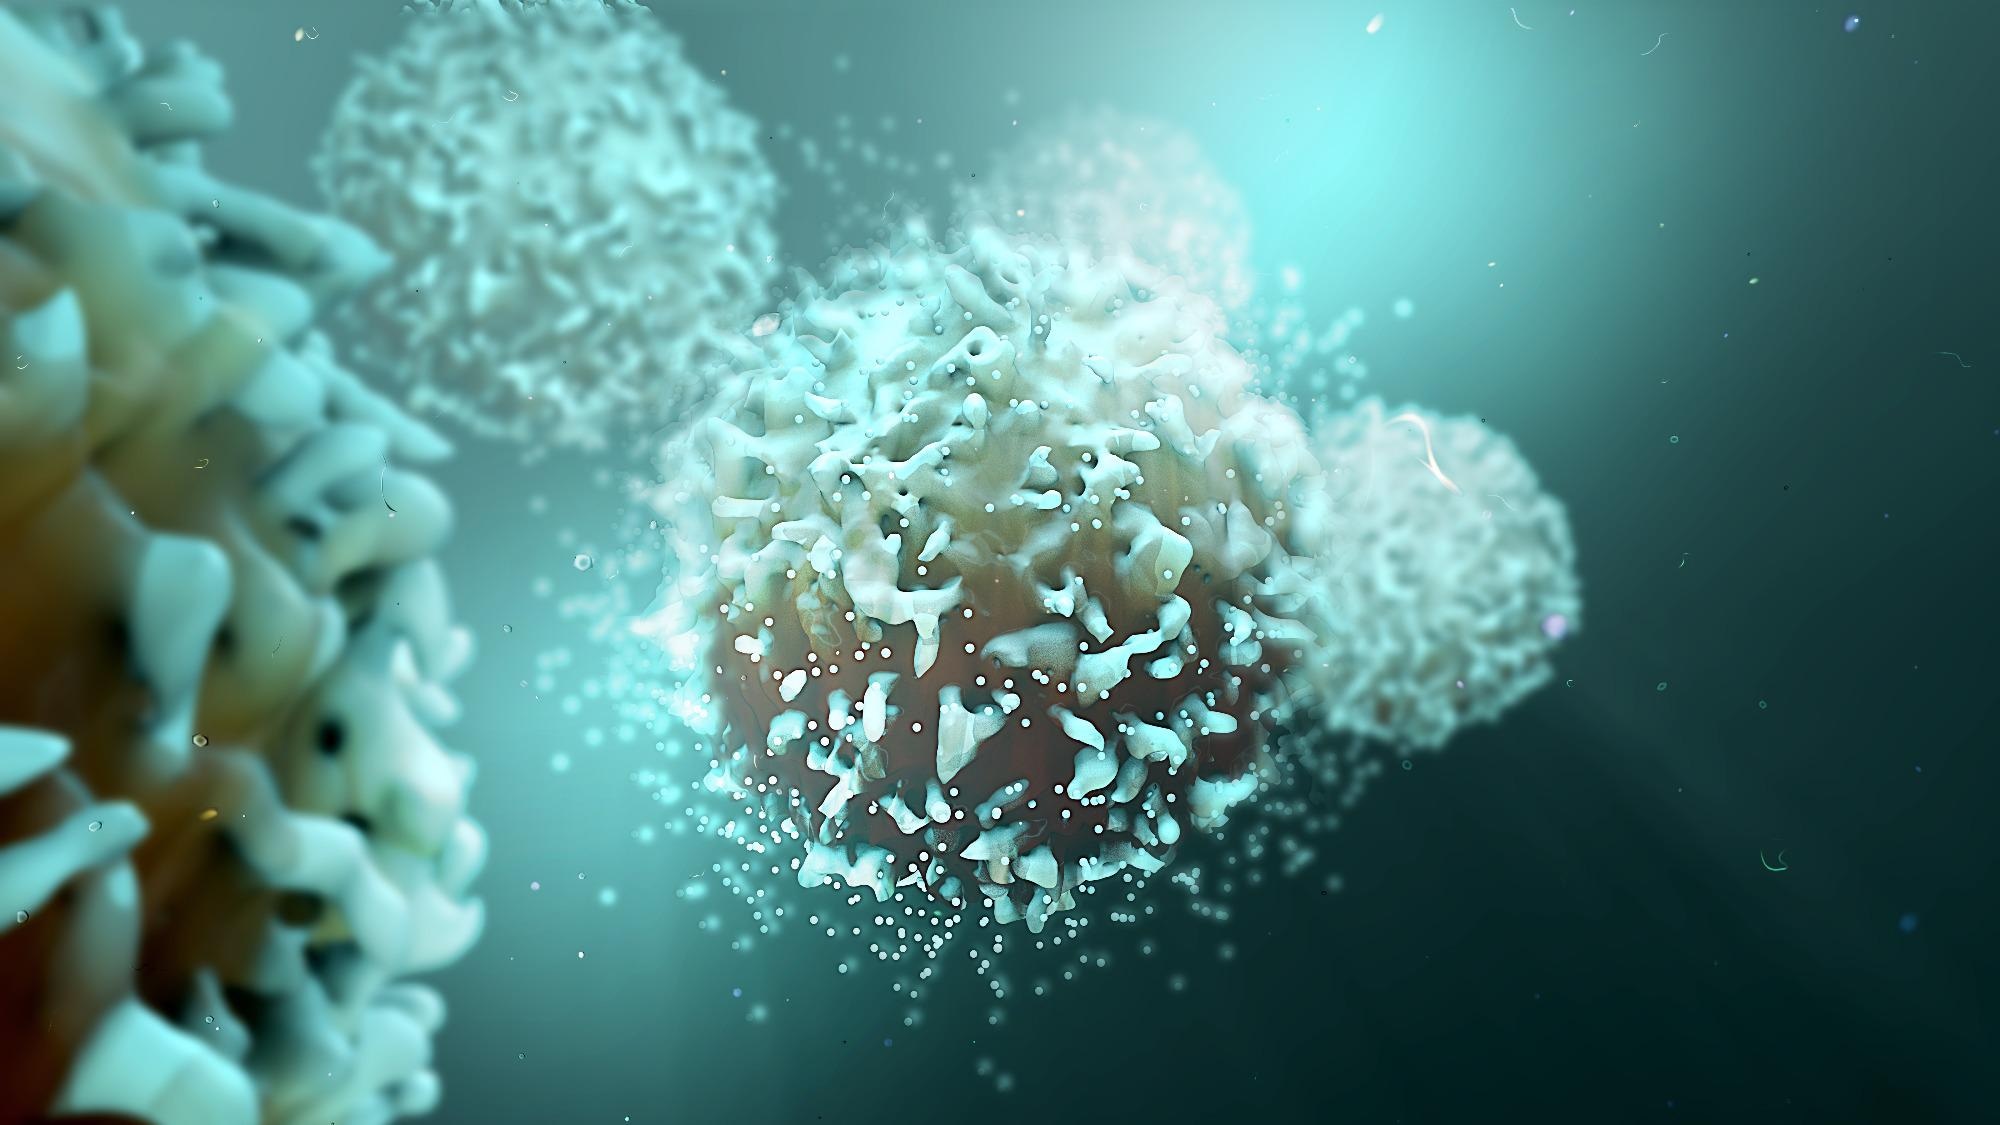 Study: SARS-CoV-2-specific T-cell epitope repertoire in convalescent and mRNA-vaccinated individuals. Image Credit: Shutterstock / Design_Cells